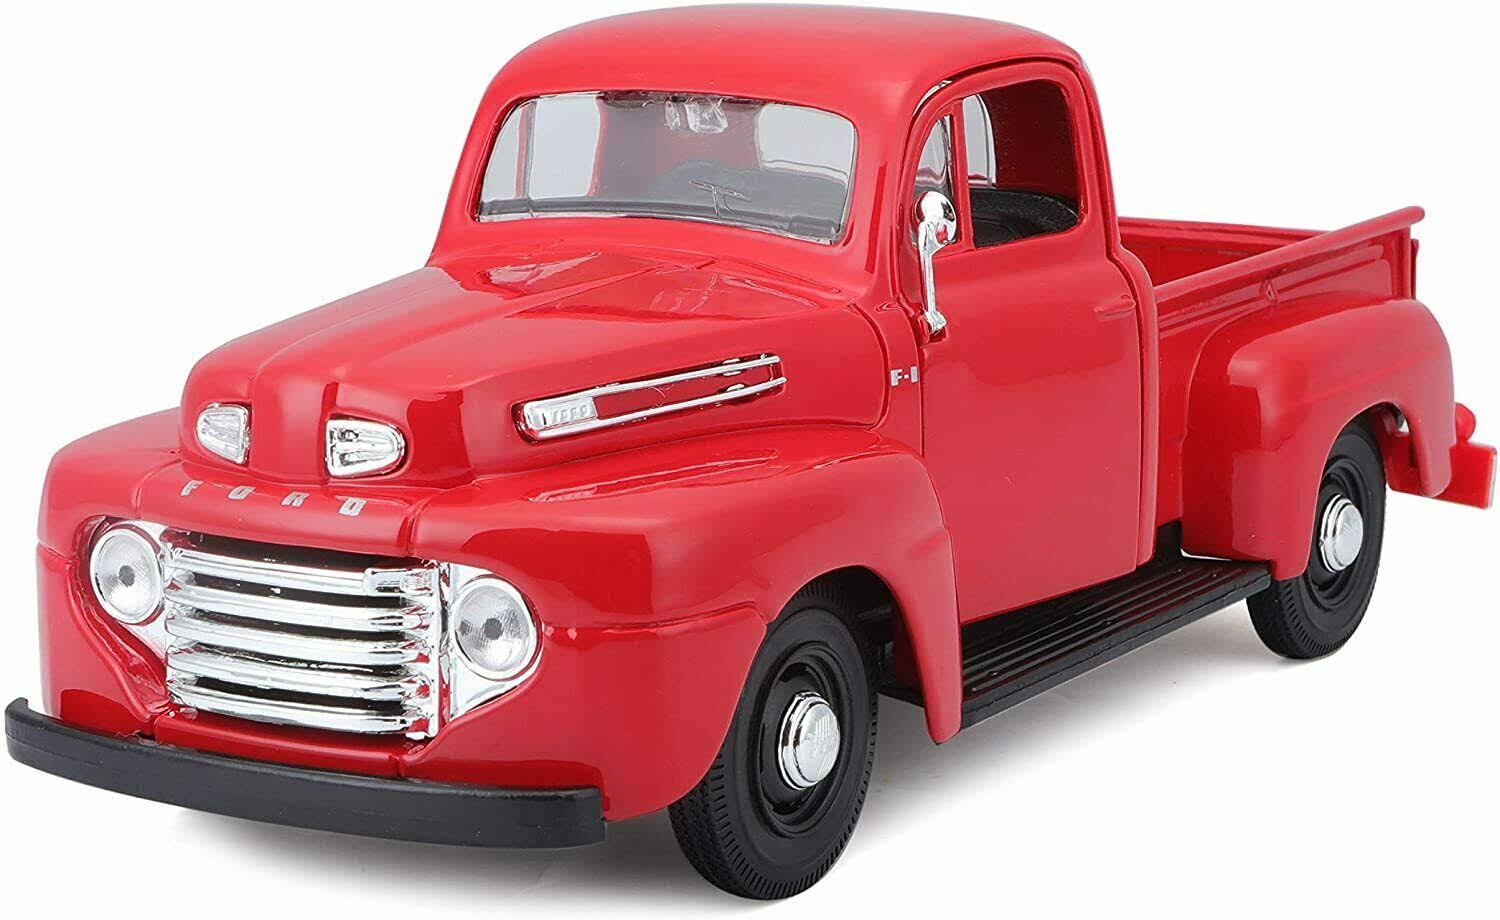 Maisto Power Racer 1948 Ford F 1 Pickup Truck Vehicle Diecast - Scale 1:25